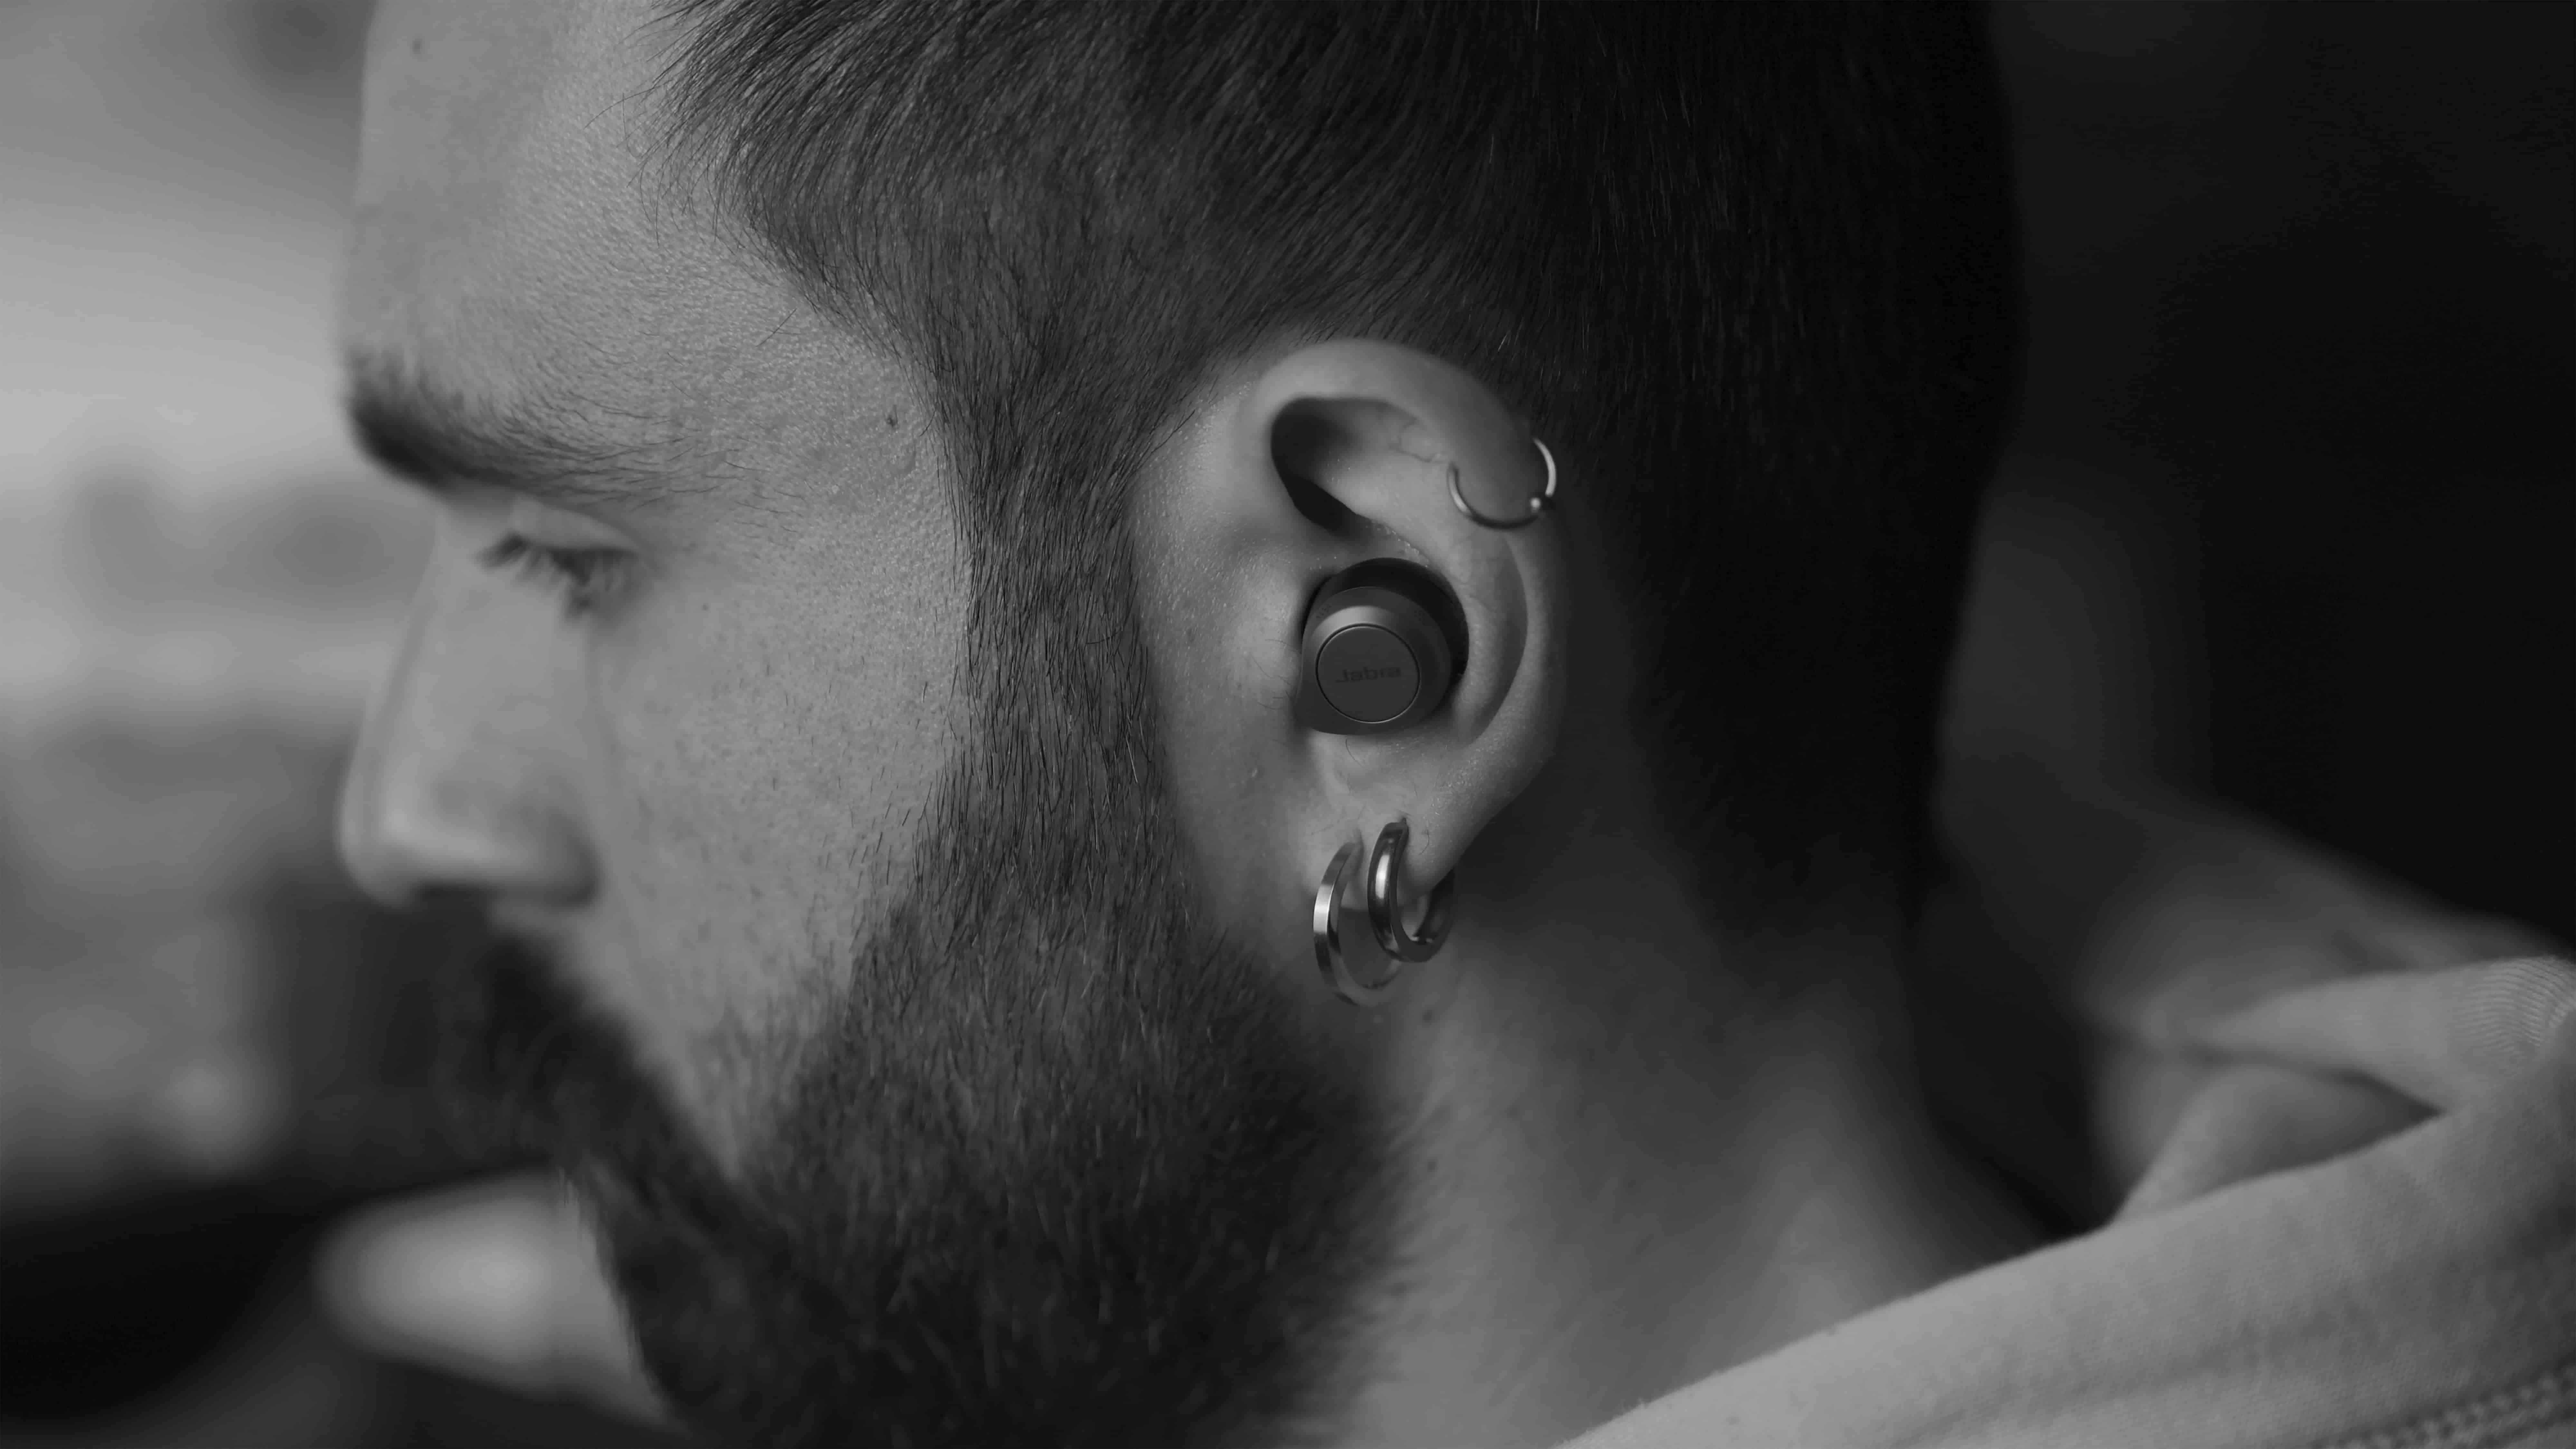 Closeup of the side of a man's face with ear piercings and wireless earbuds.